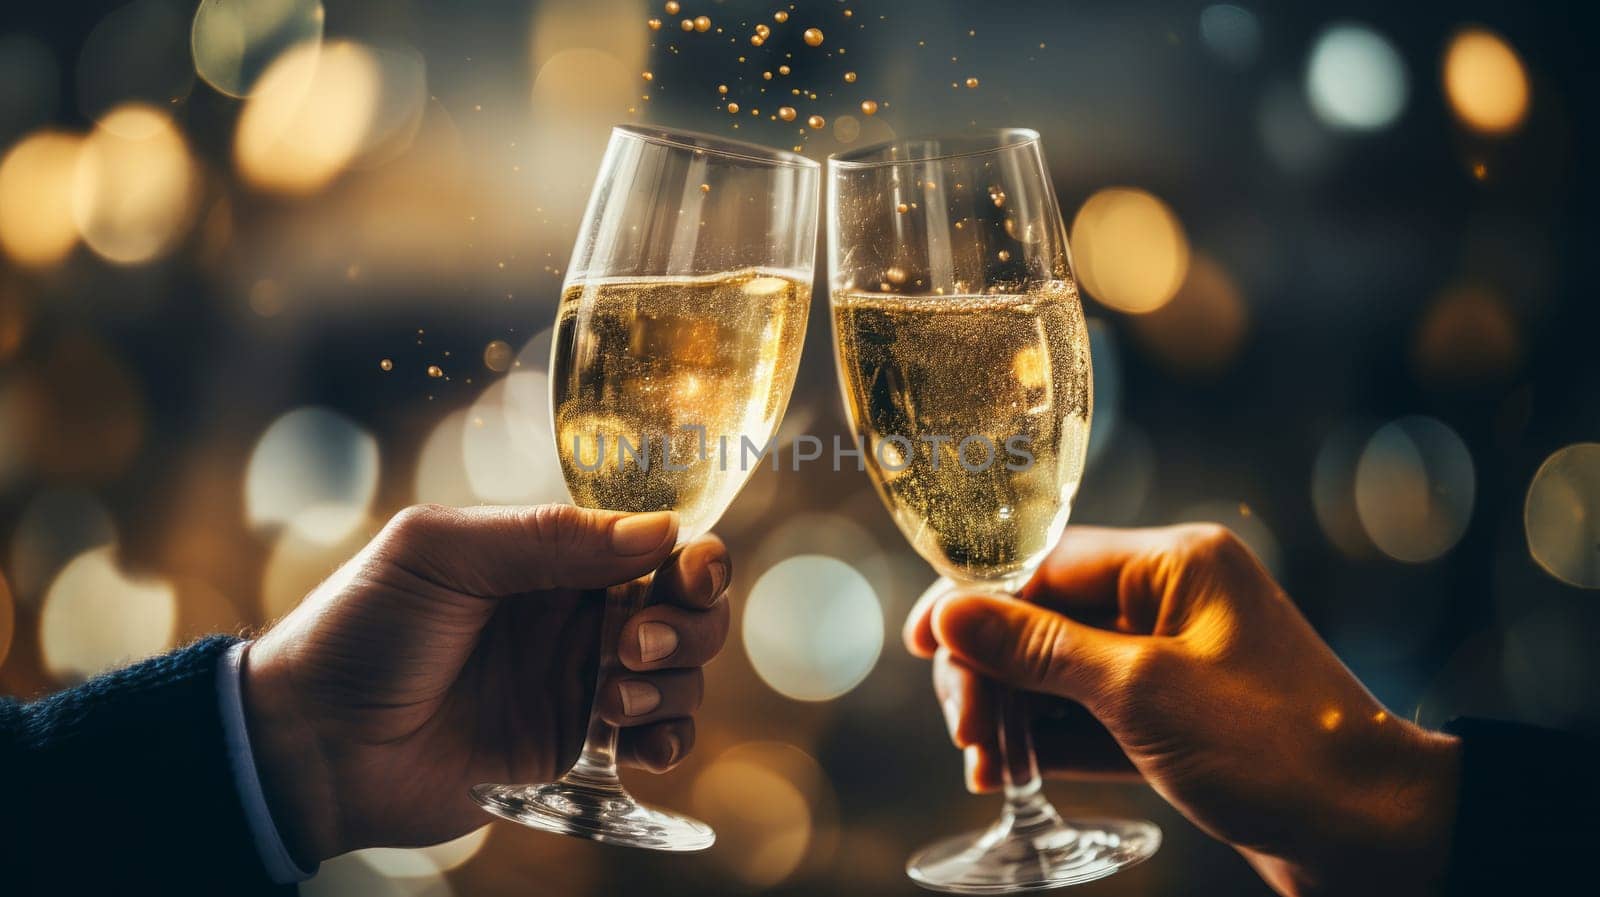 Celebrate with champagne Capture the festive mood of a party with this elegant photo of two hands clinking champagne glasses against a sparkling bokeh background. High quality photo